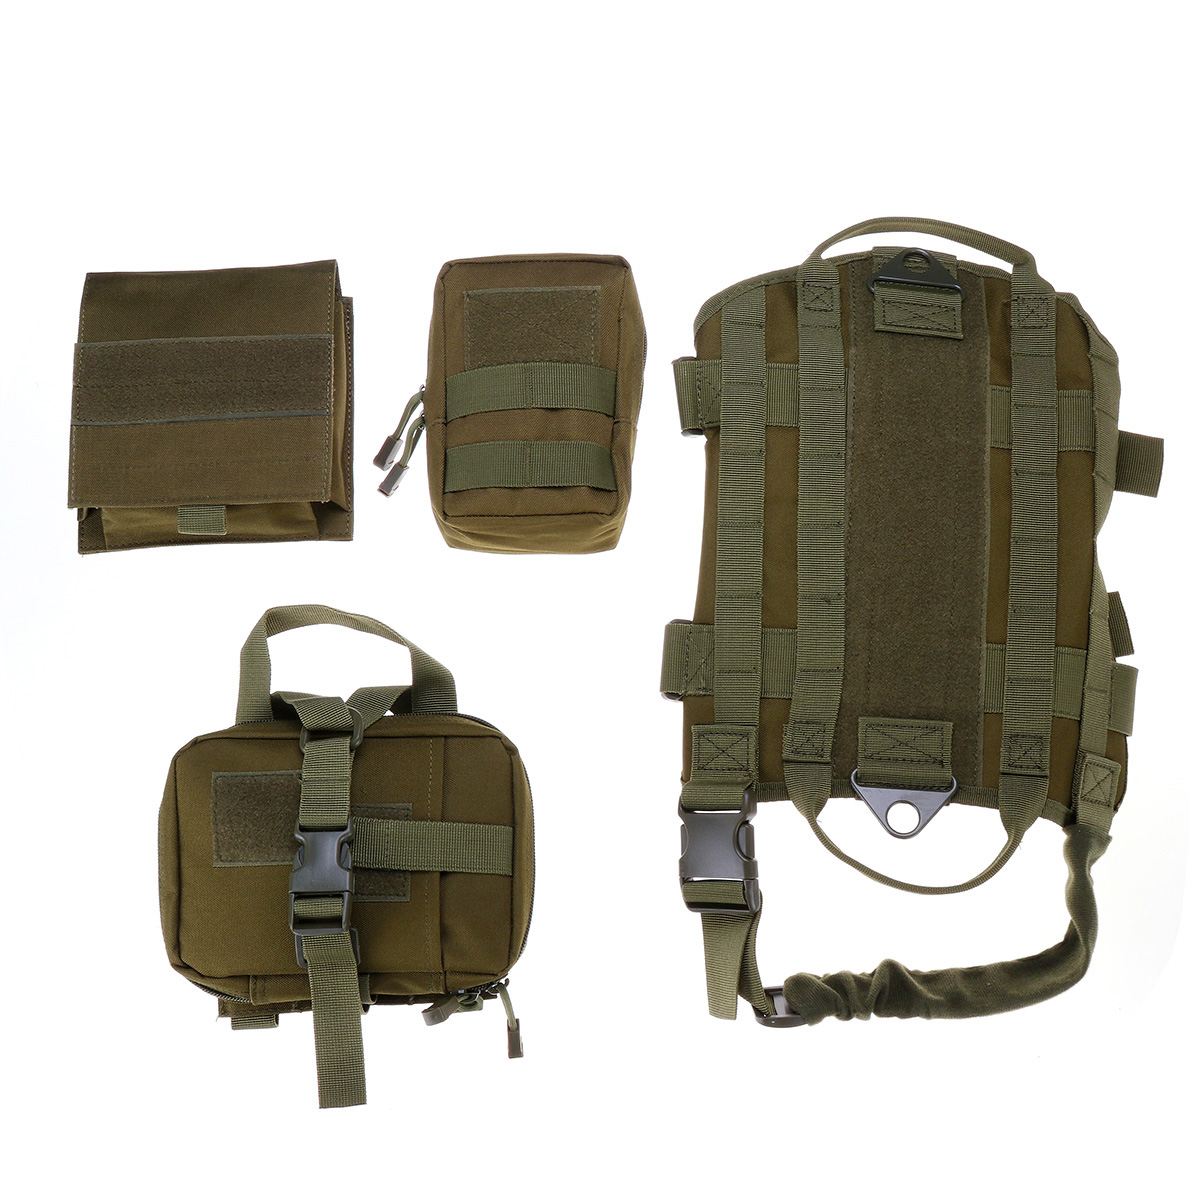 S-1000D-Nylon-Waterproof-Dog-Tactical-Vest-Military-Training-Clothes-1600242-5